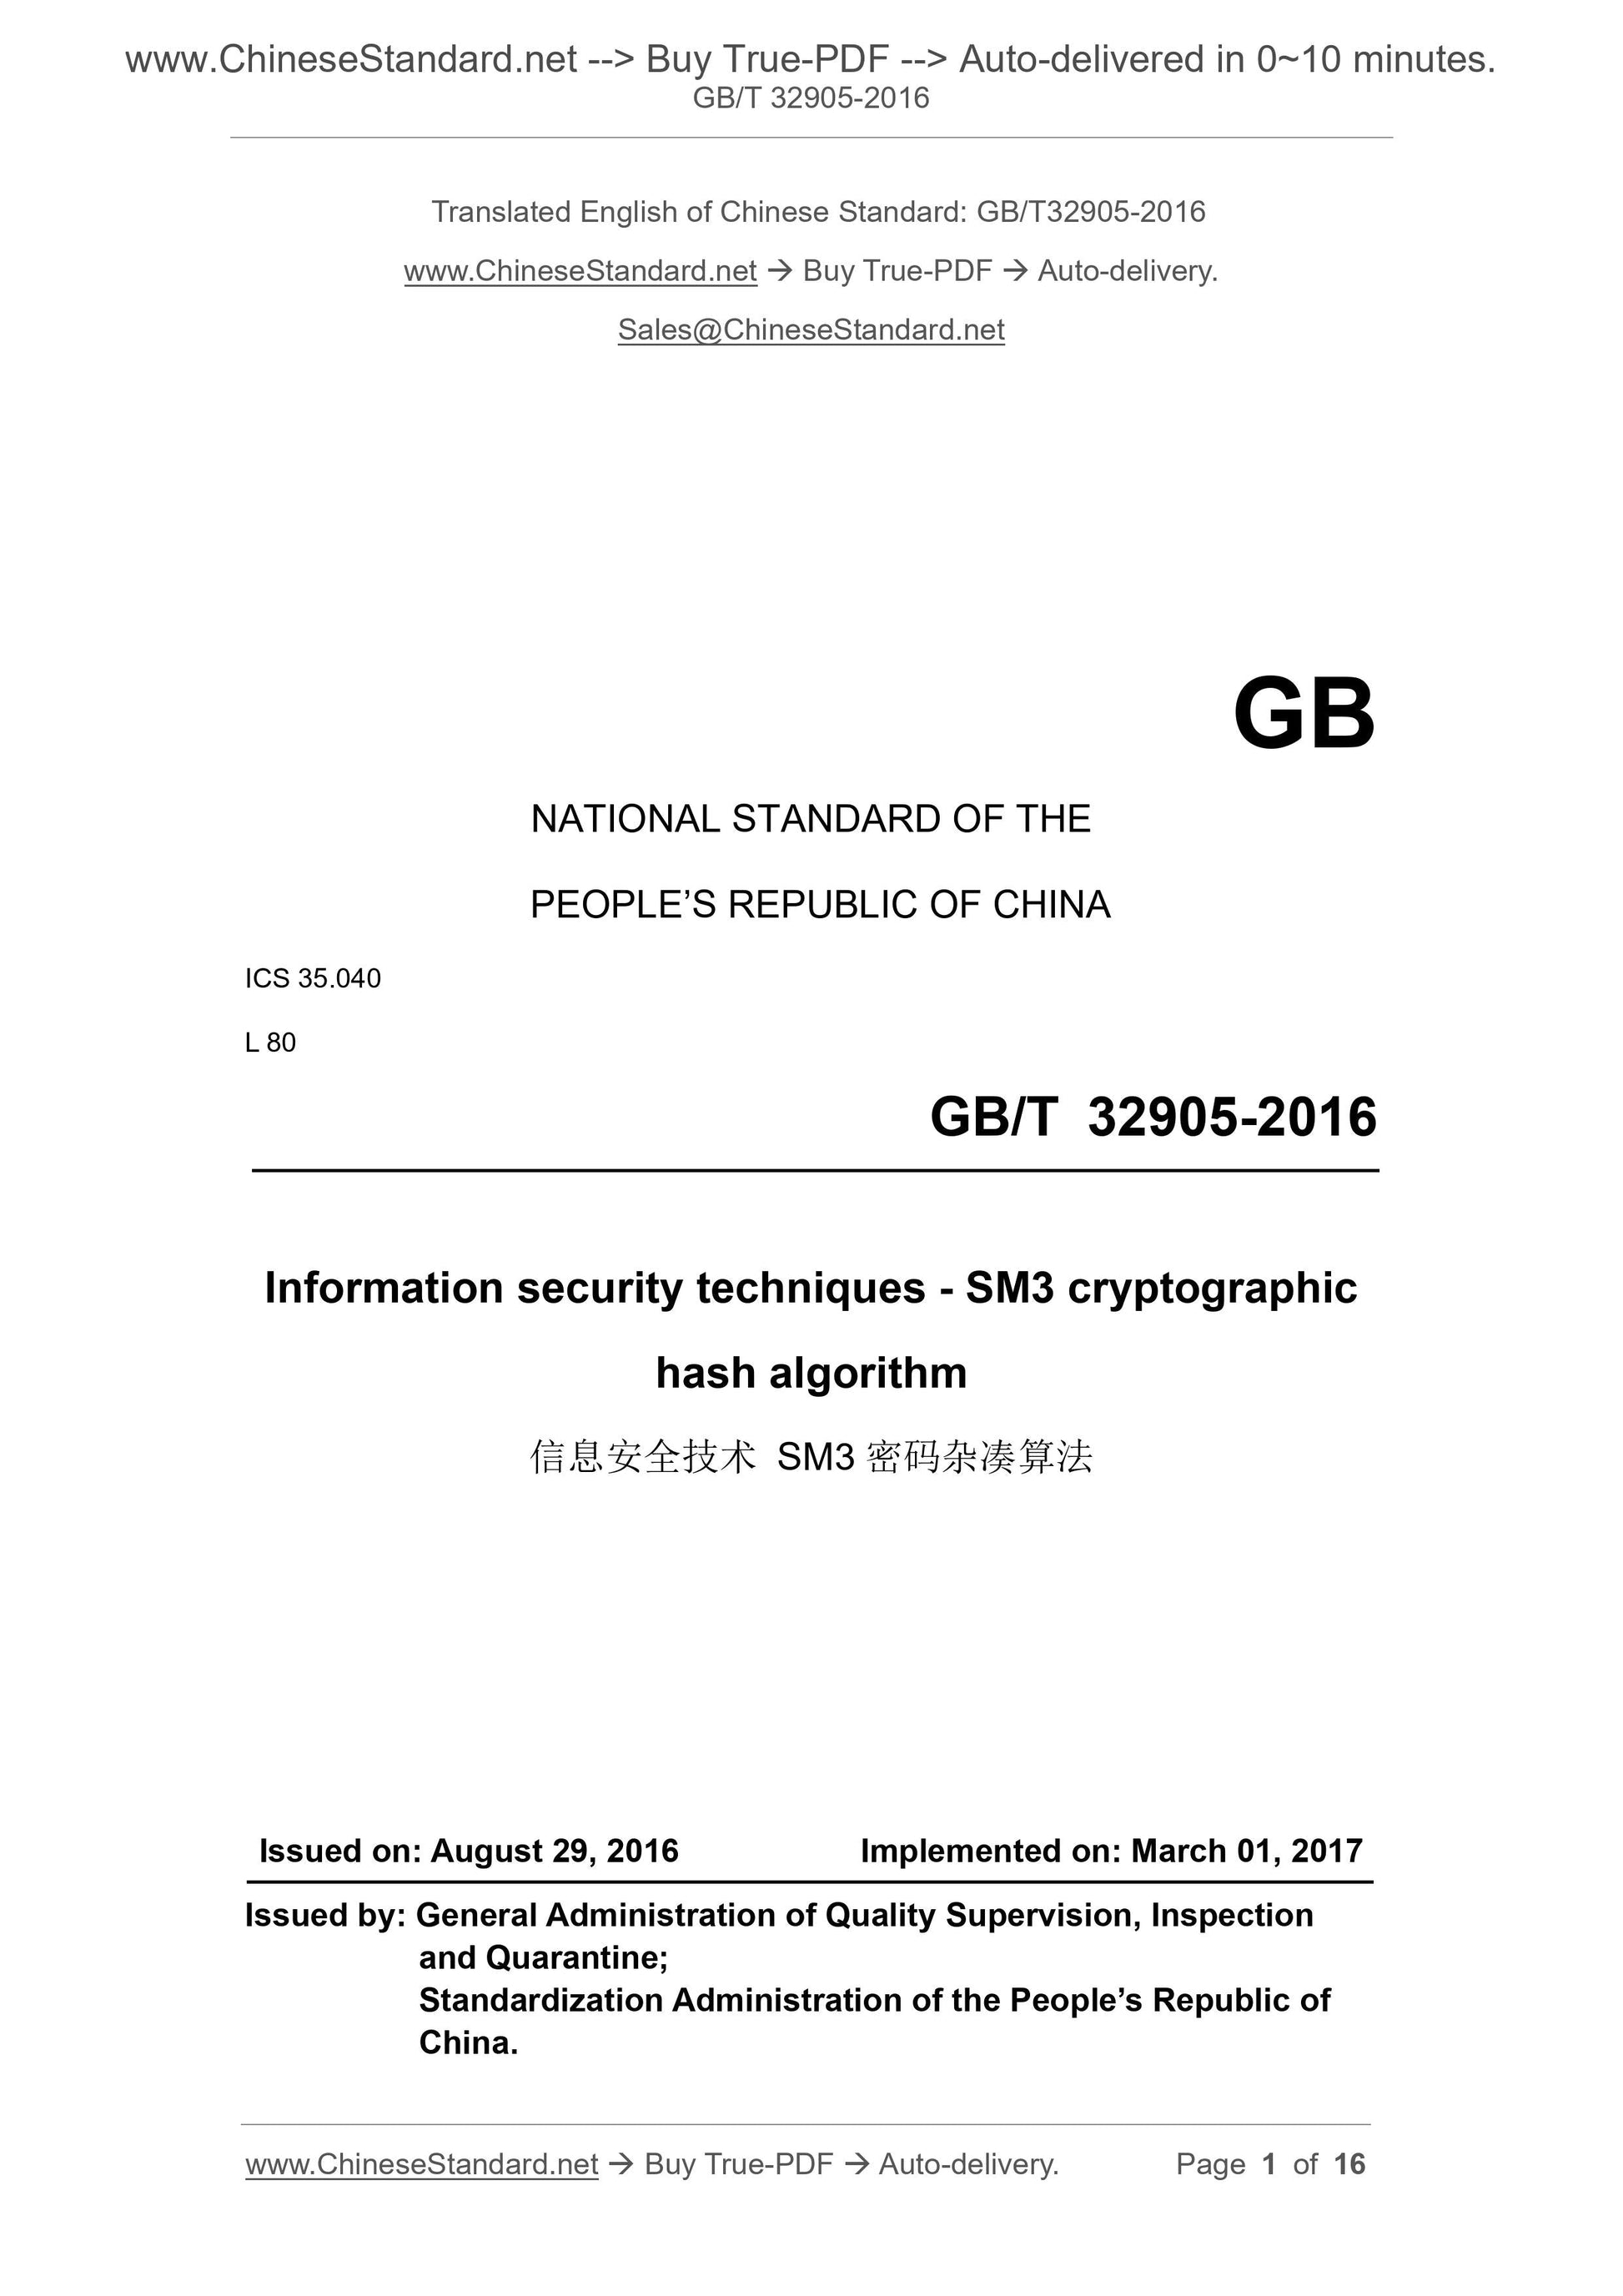 GB/T 32905-2016 Page 1